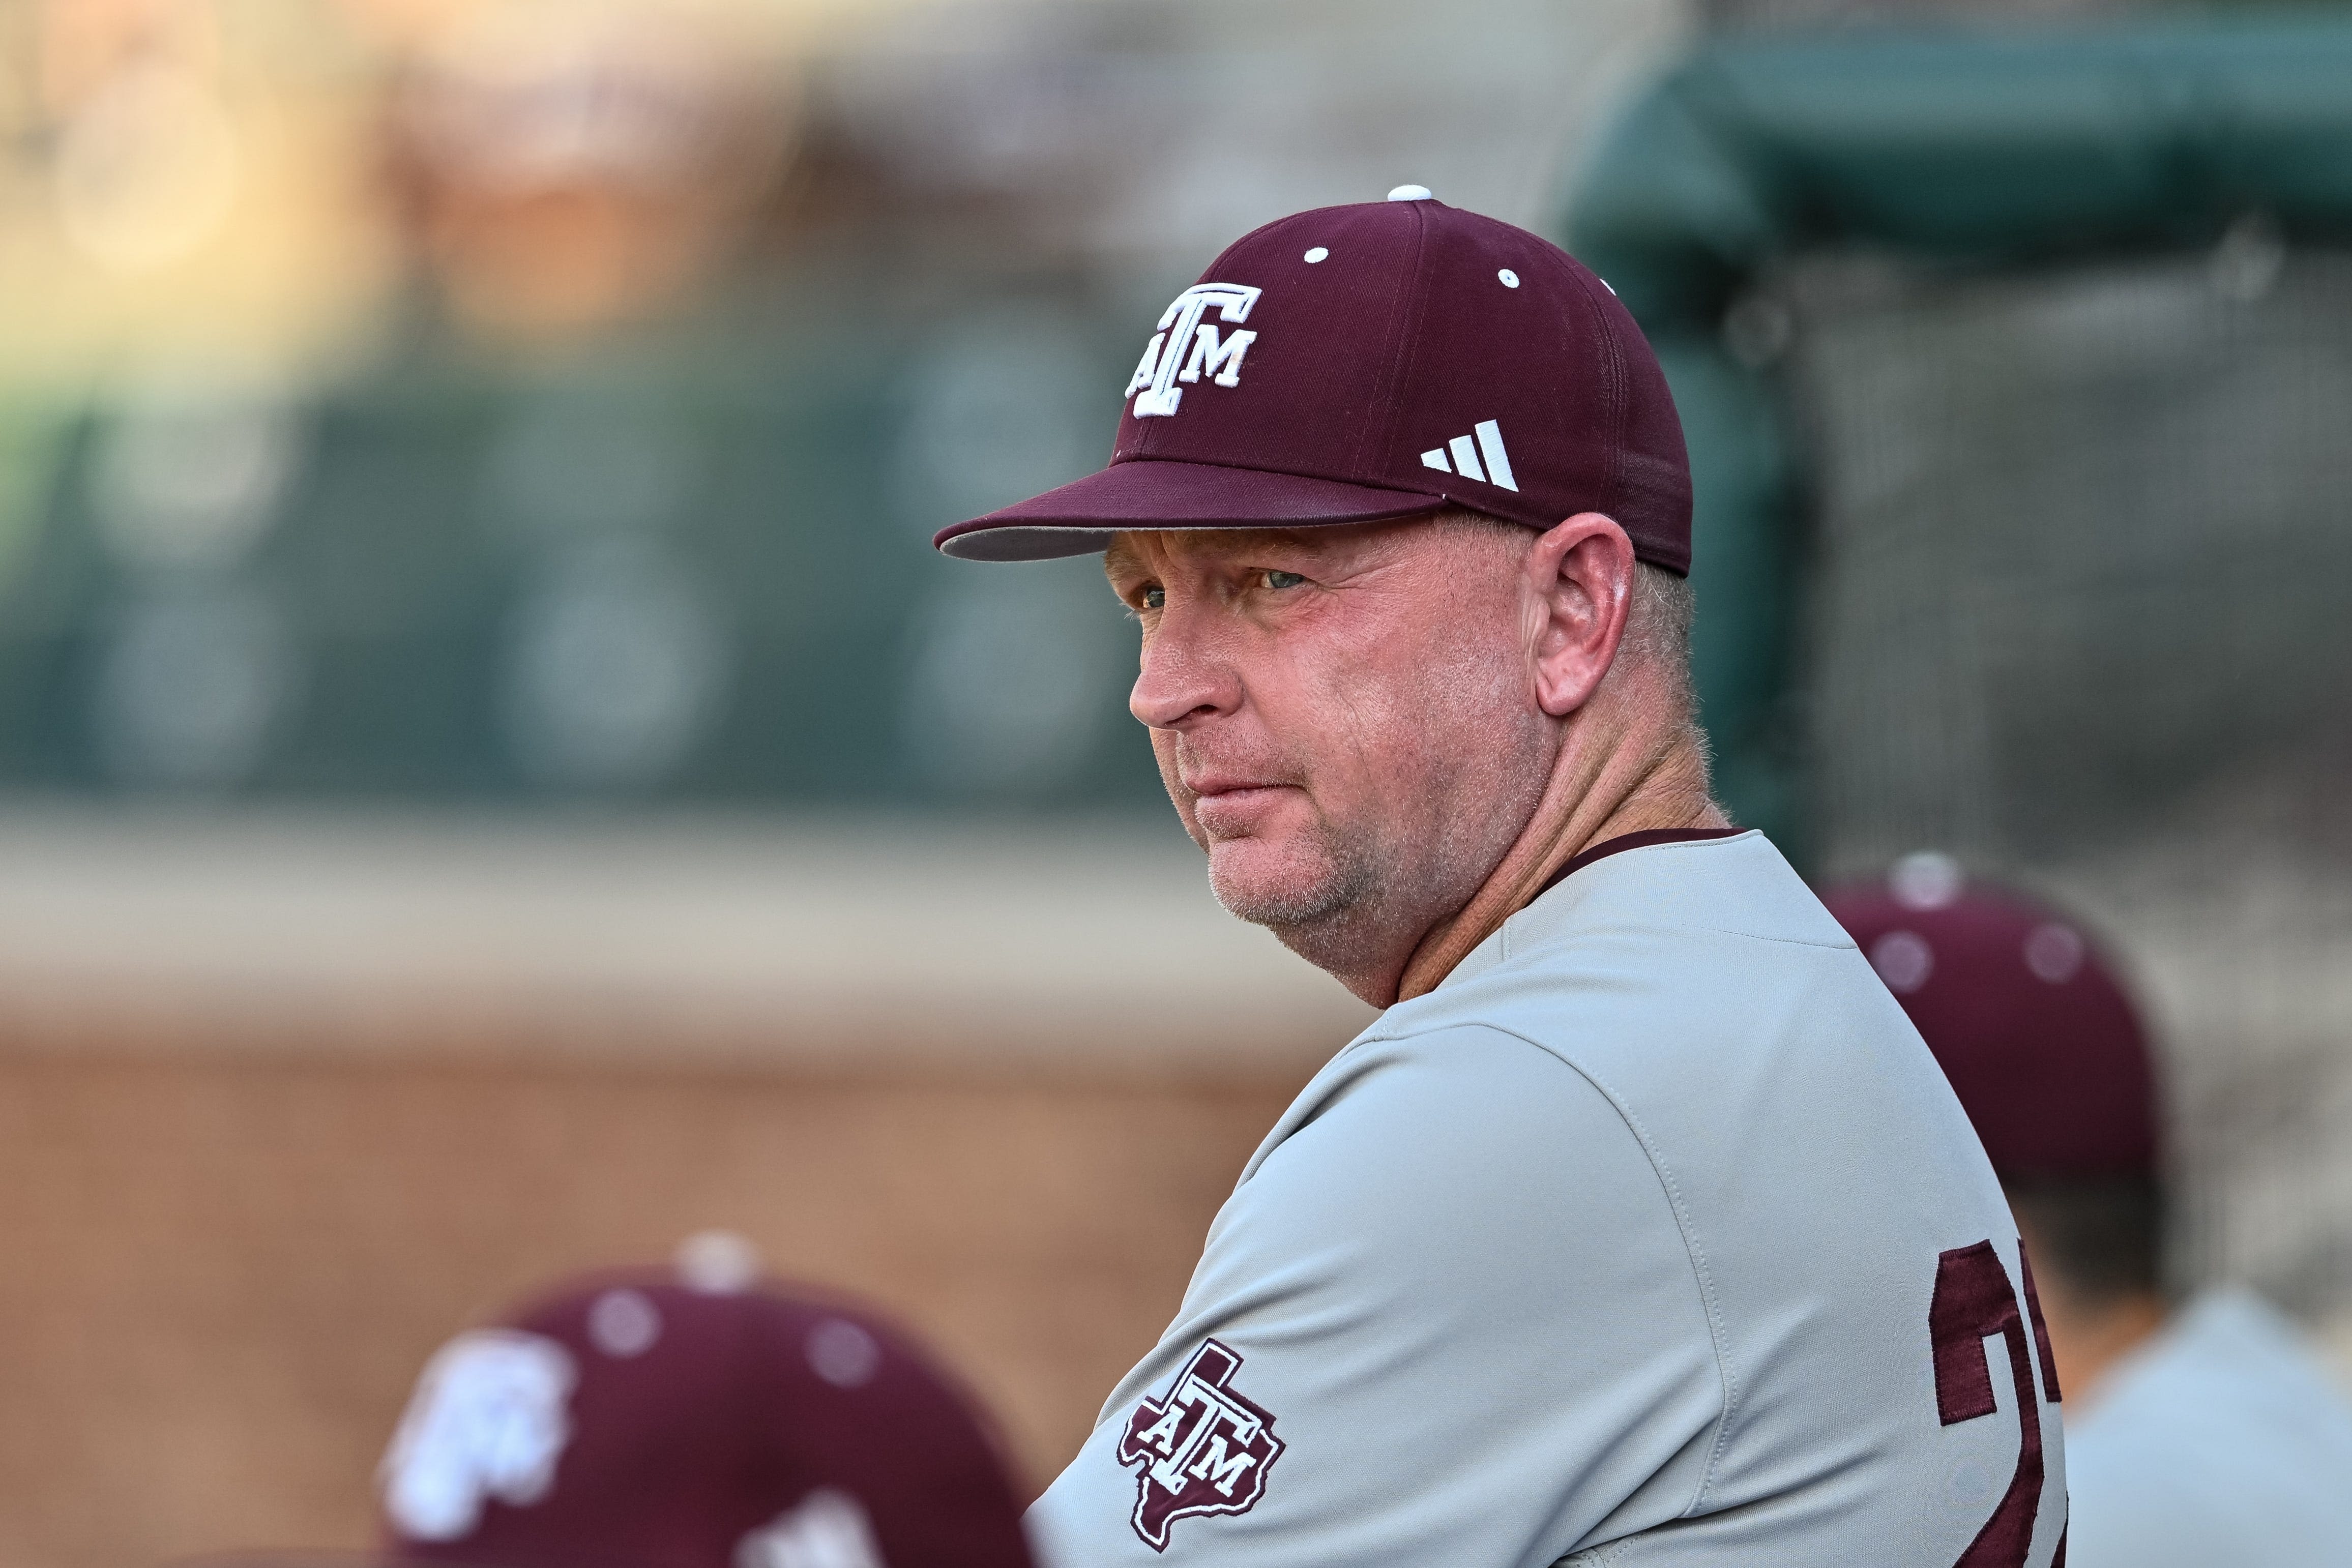 Jim Schlossnagle on Texas: 'I took the job at Texas A&M to never take another job again'